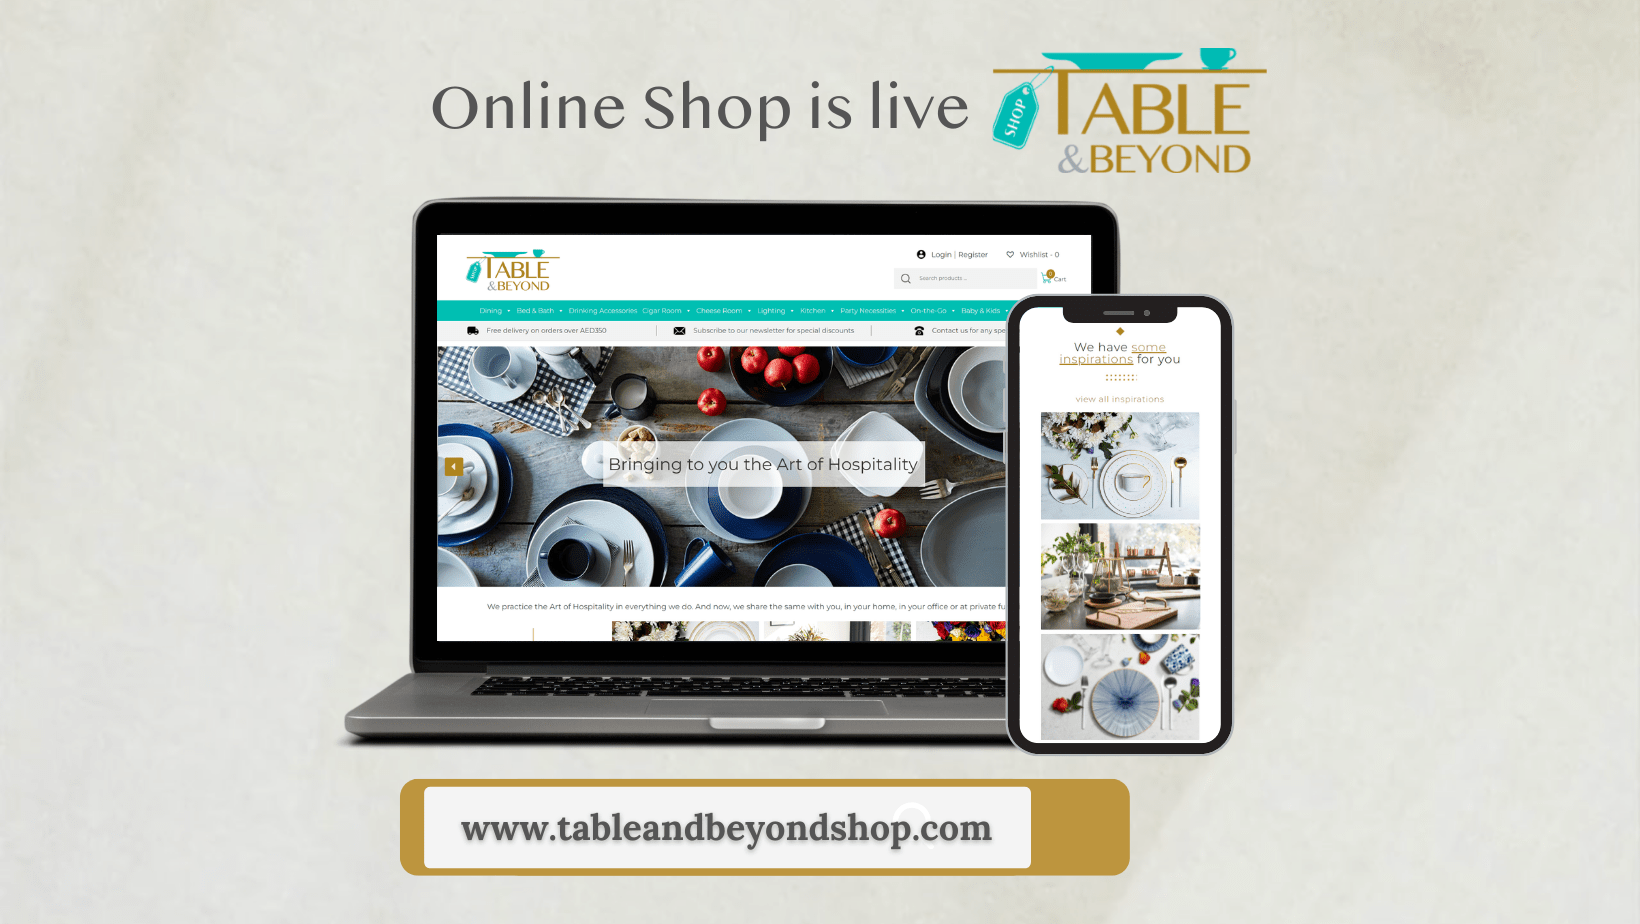 Table And Beyond Shop Is Live